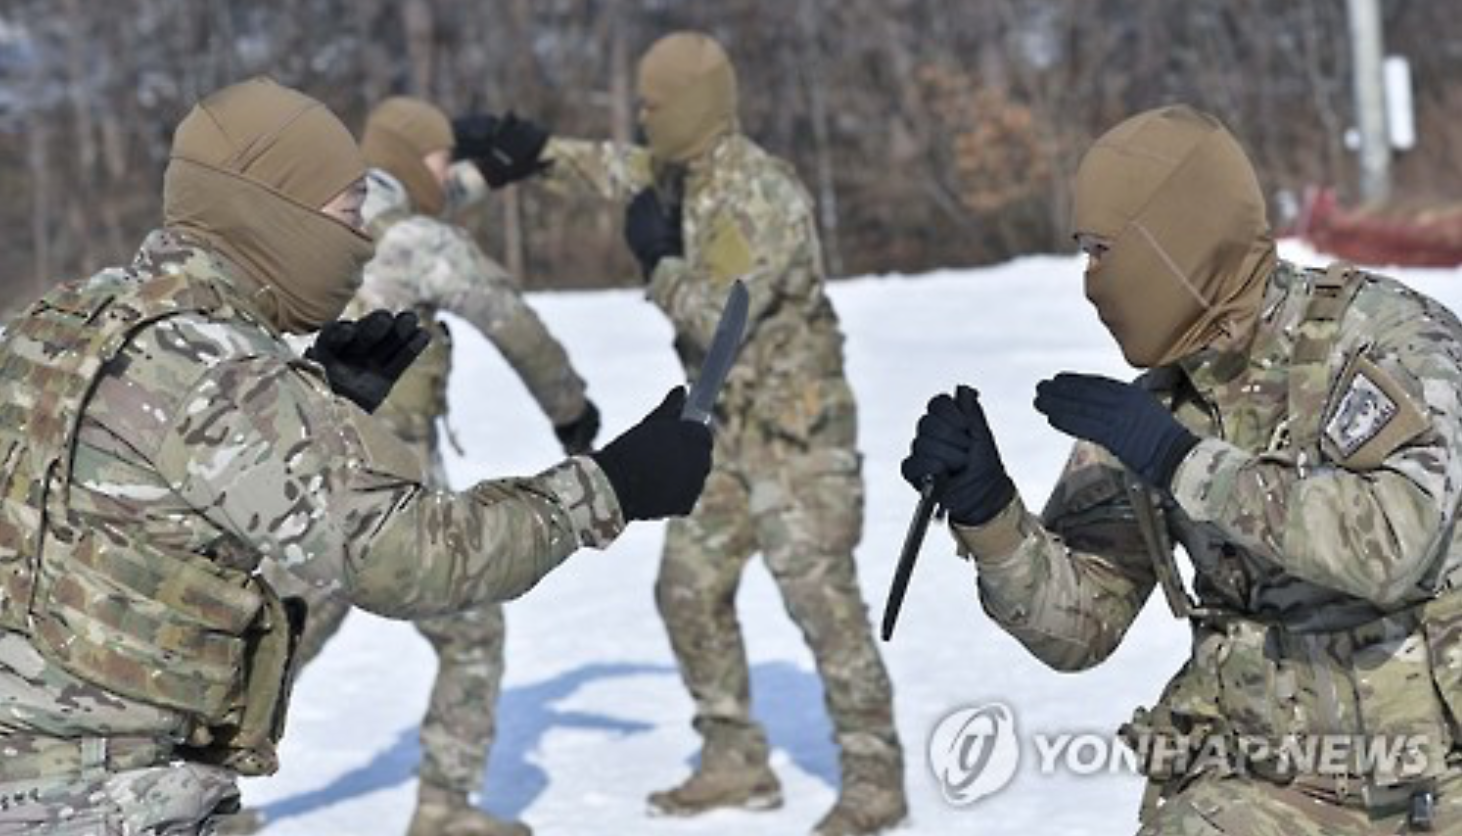 South Korean Special Forces Knife Training